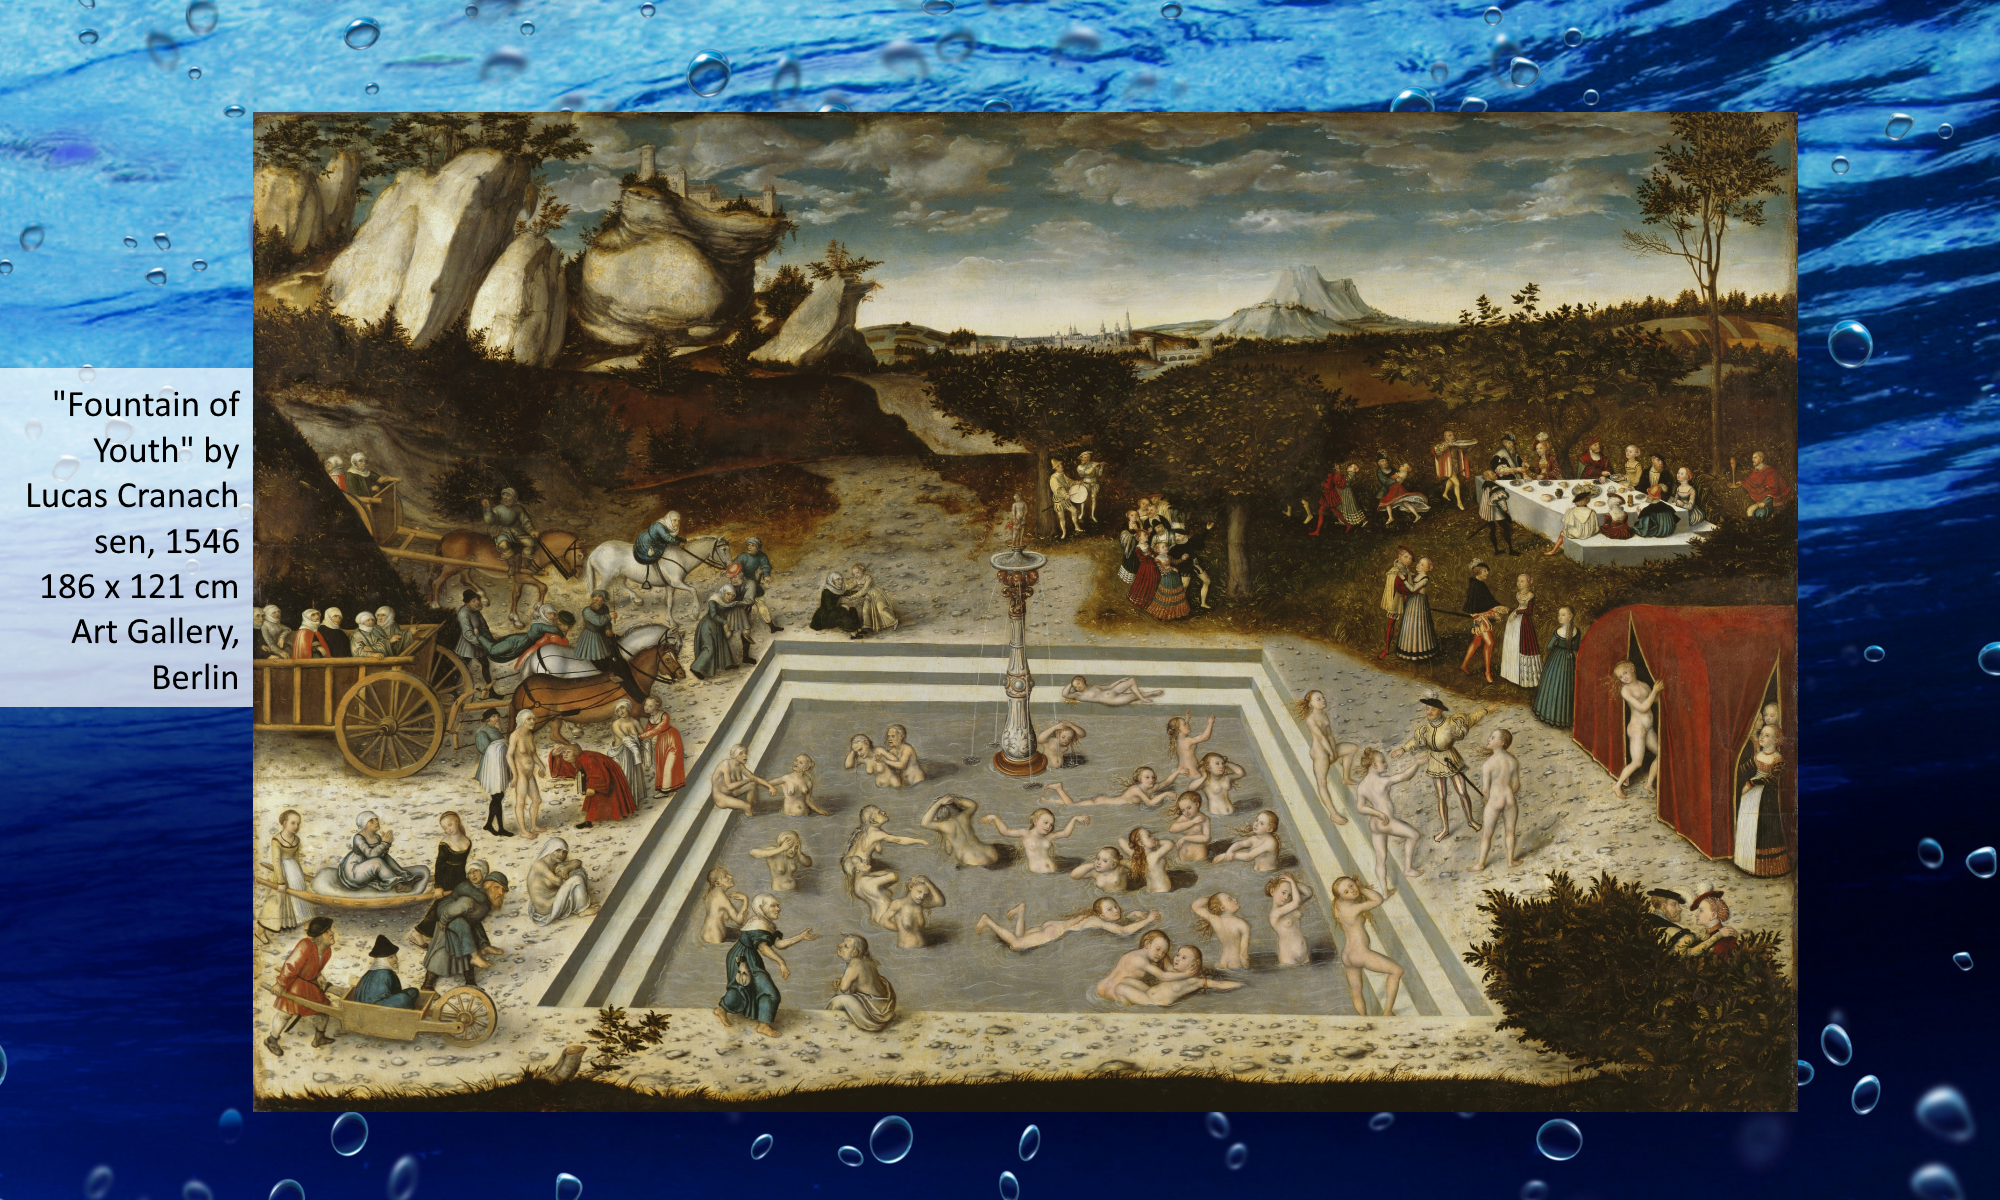 Fountain of youth by Lucas Cranach